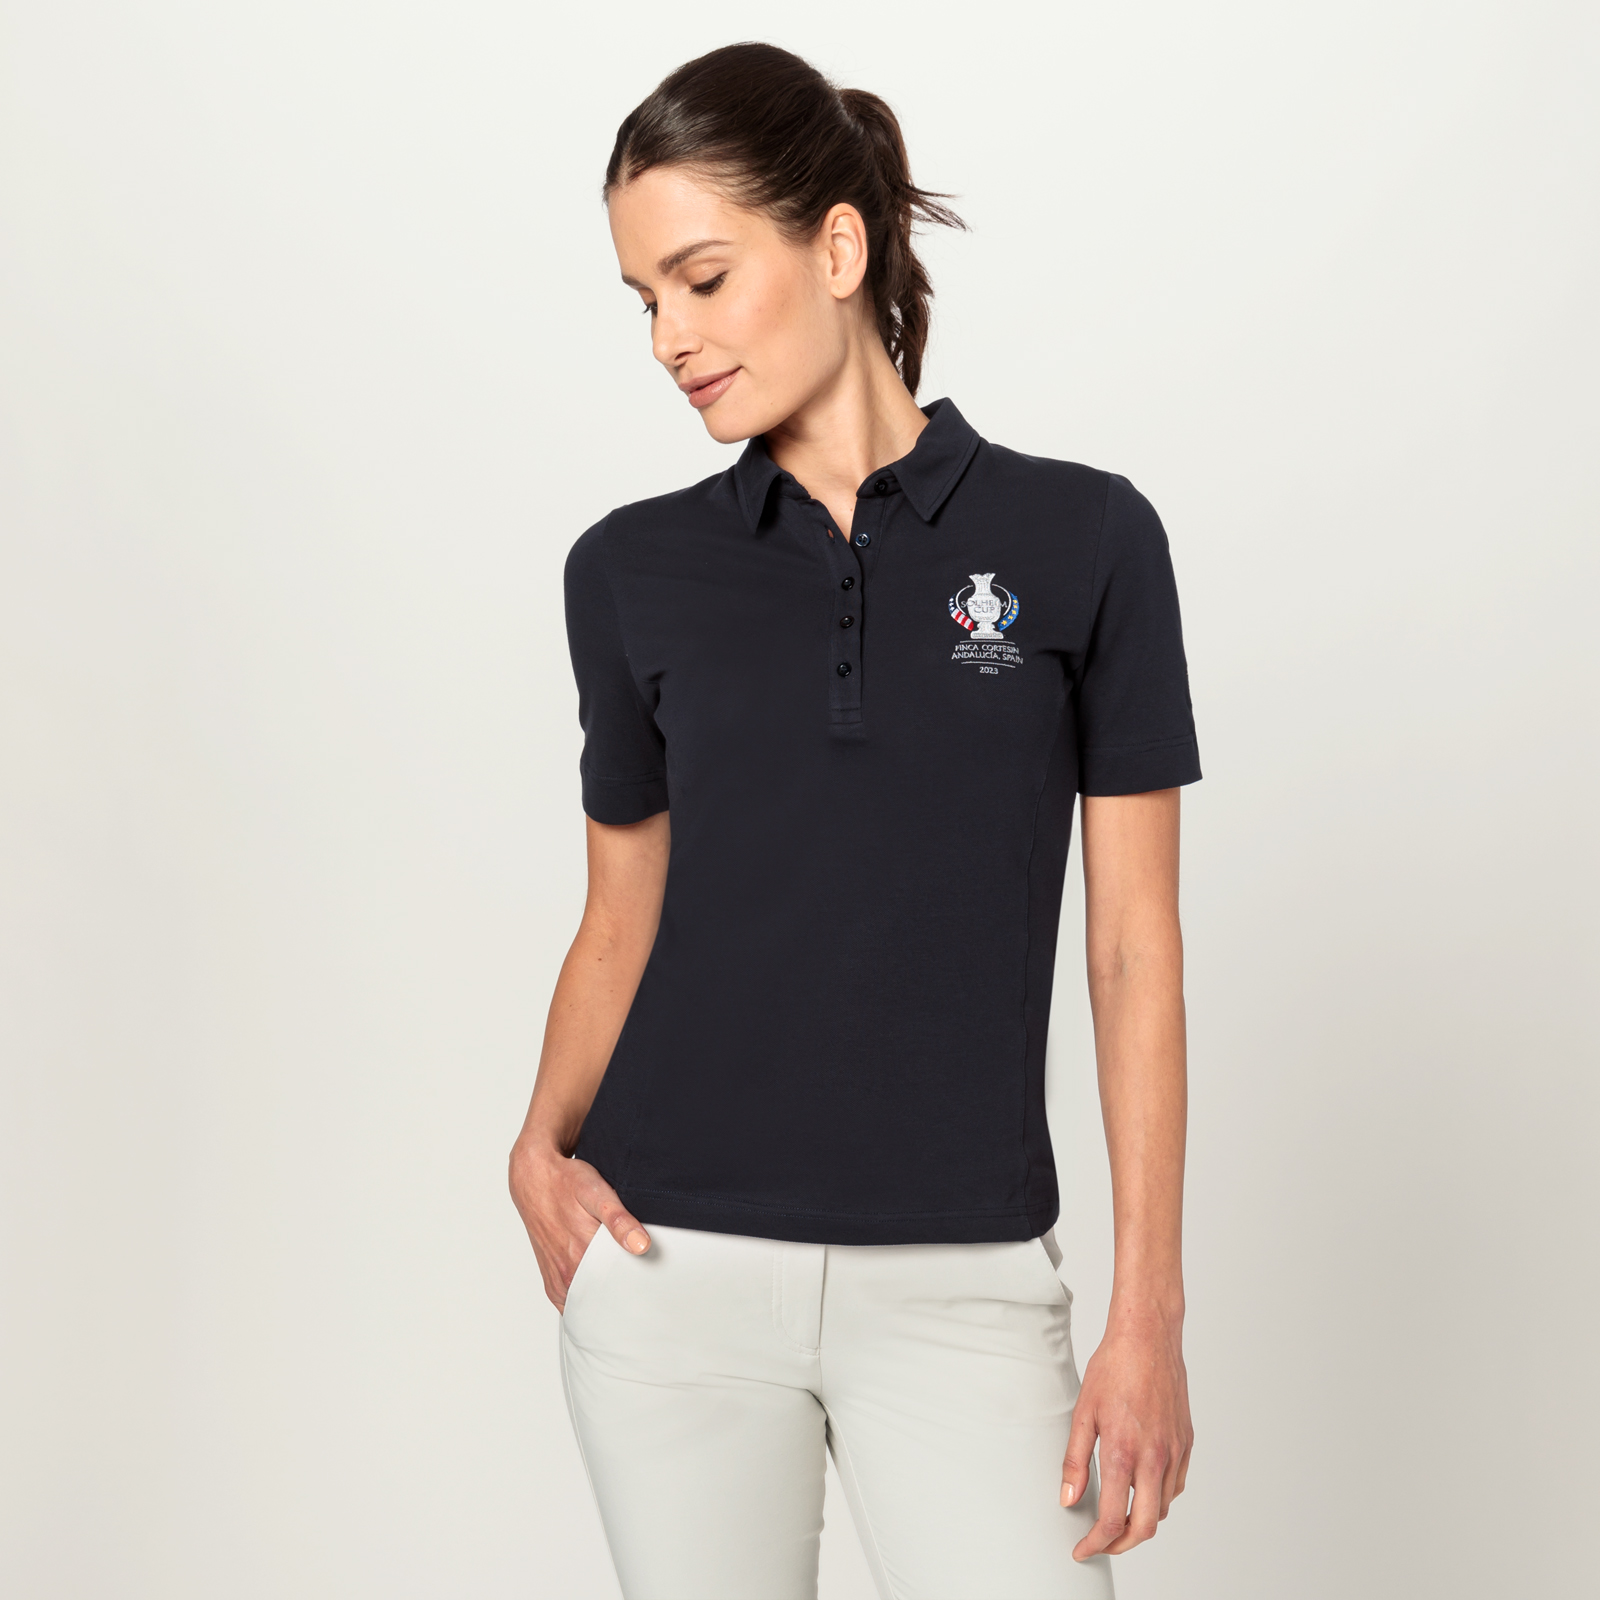 Ladies' slim fit golf polo shirt with sun protection in Solheim Cup design 